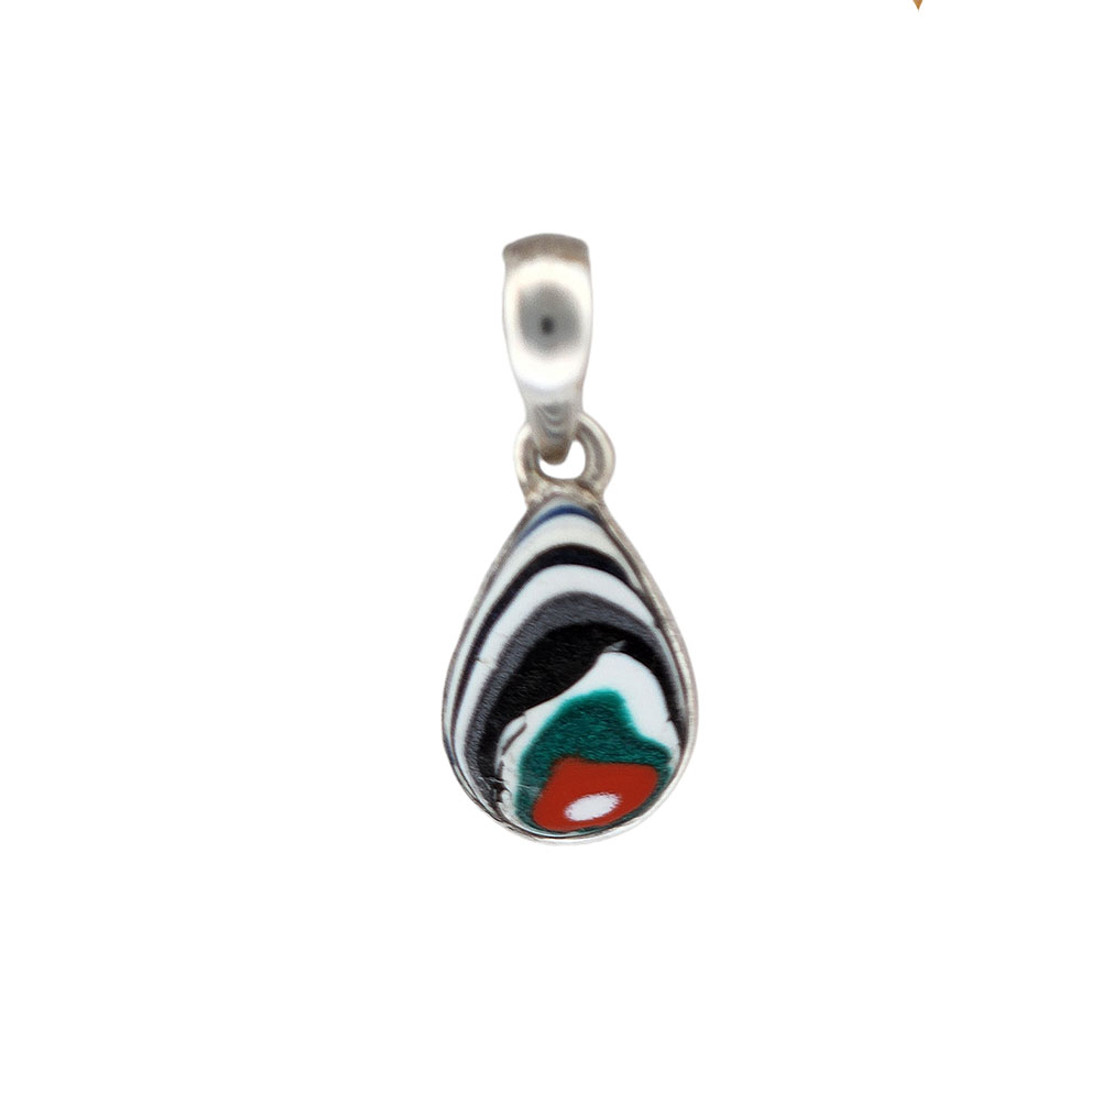 Small teardrop-shaped blue, green, red and white Fordite silver pendant. 